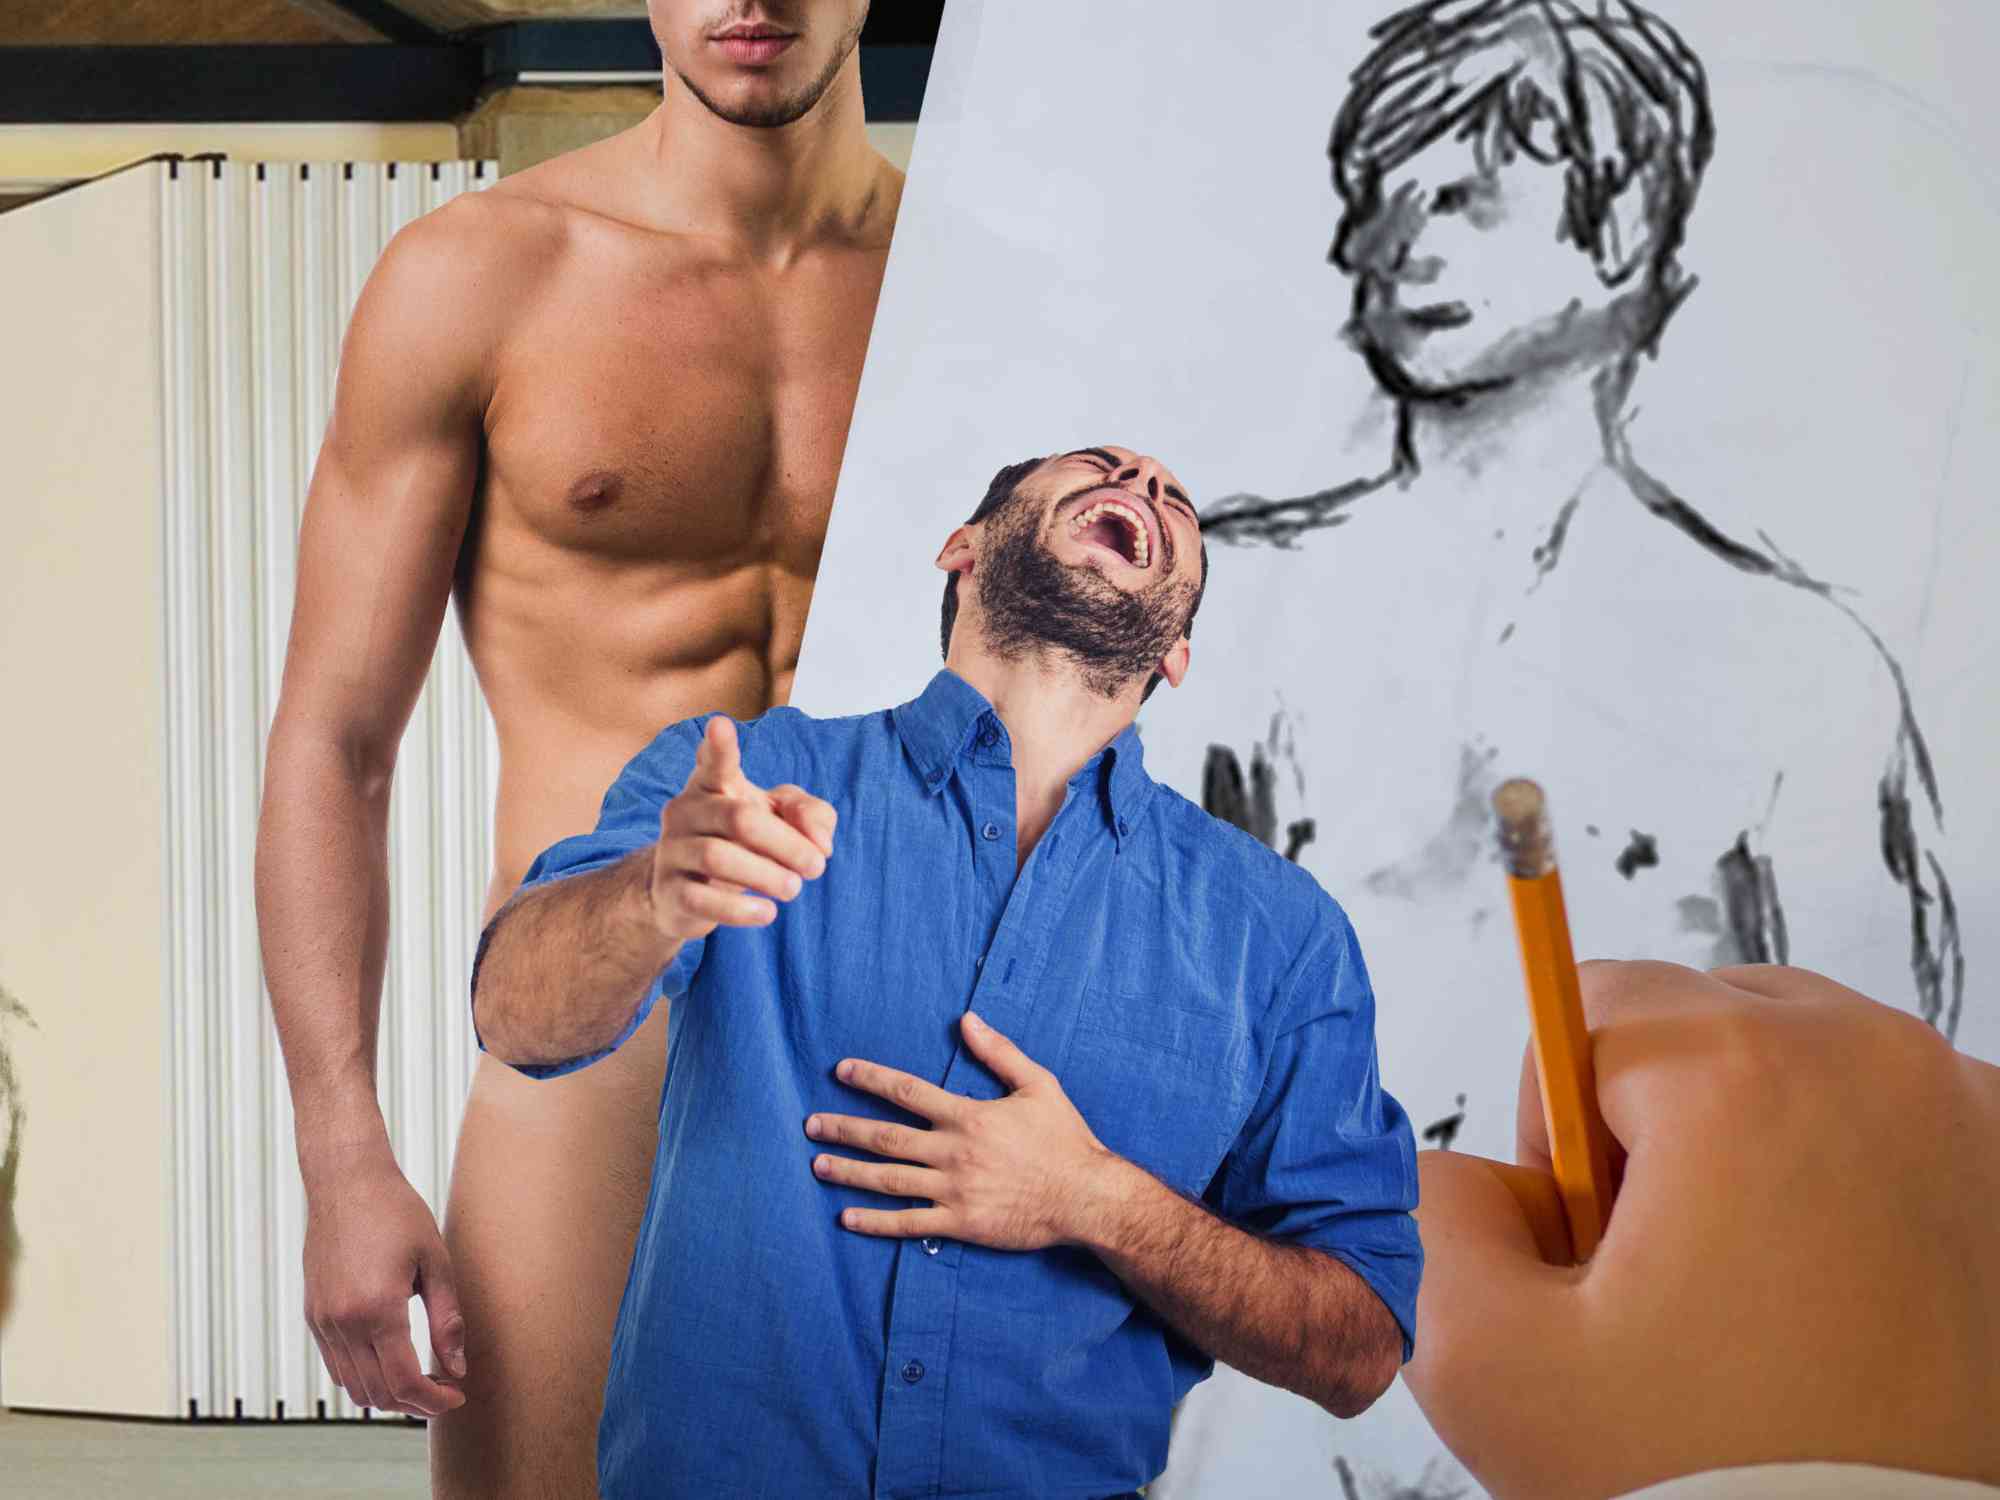 Cheap Stag Do Ideas in London - Life Drawing Stag Stitch-Up